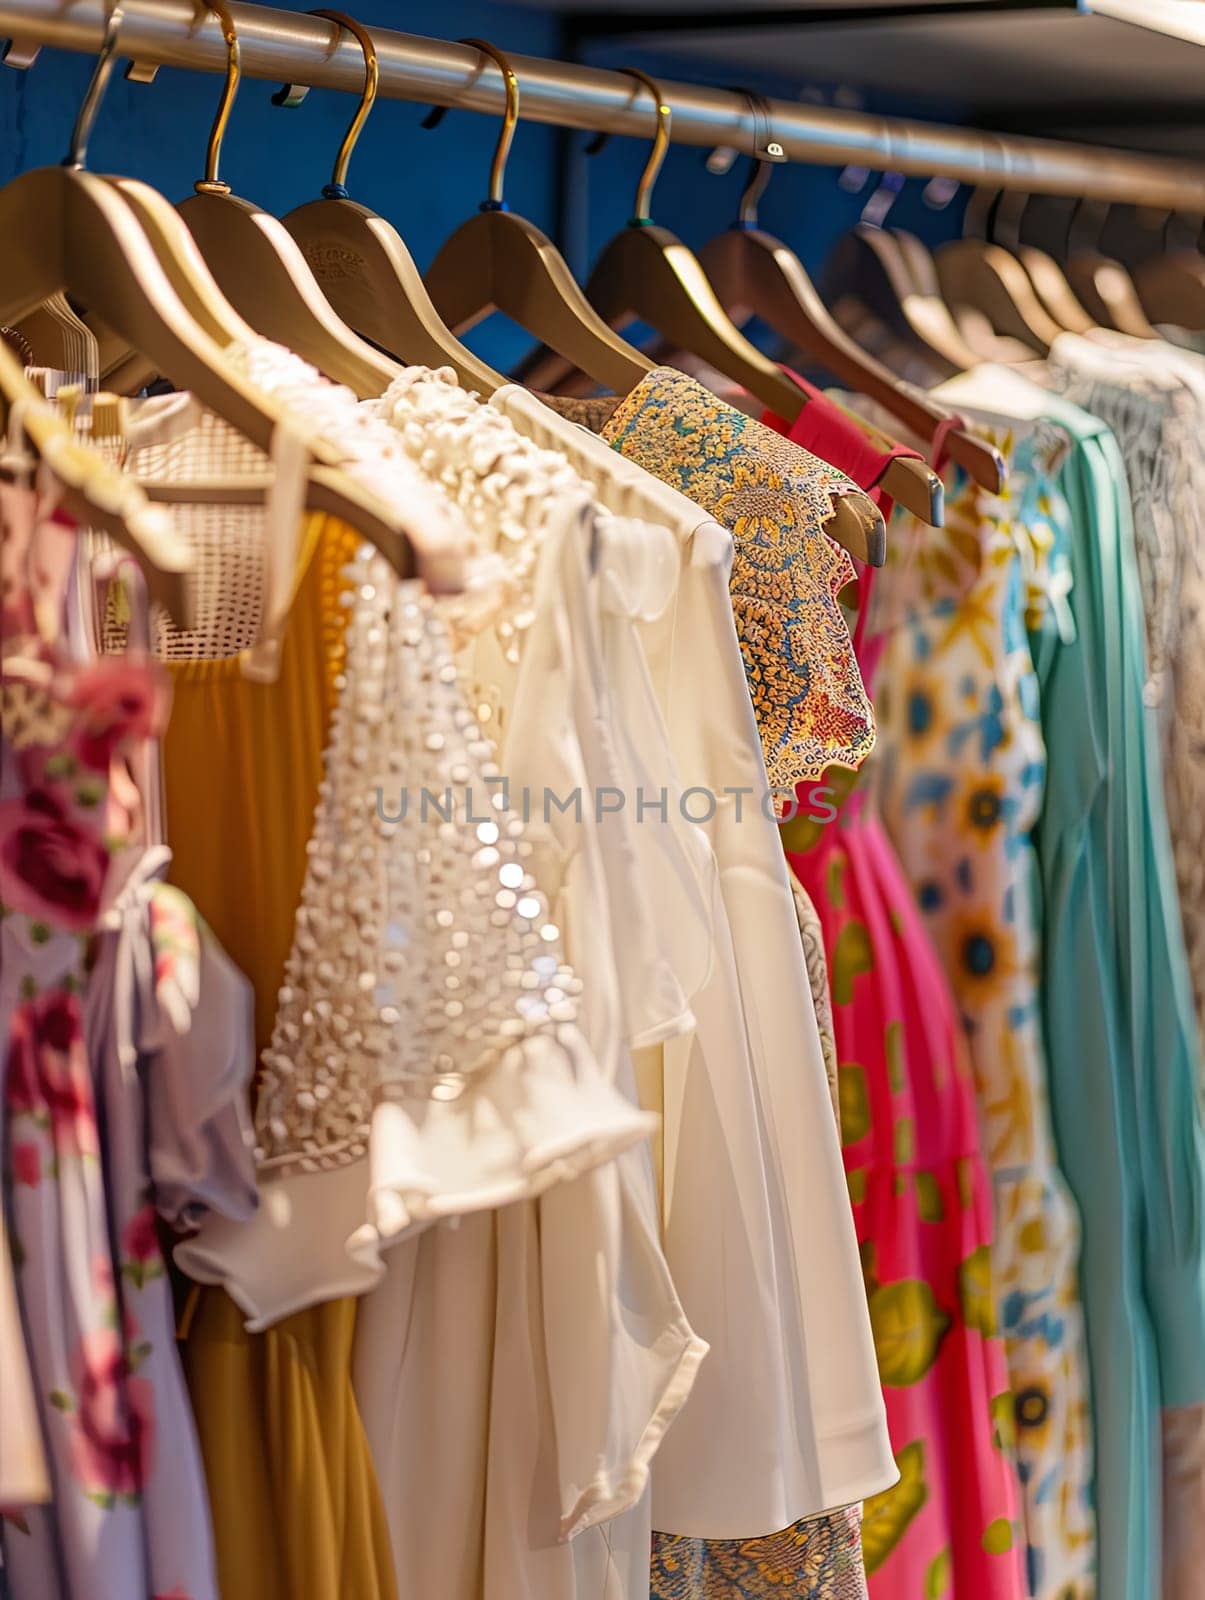 Rack filled with summer dresses and shirts neatly placed on hangers in a fashionable womens clothing showroom.